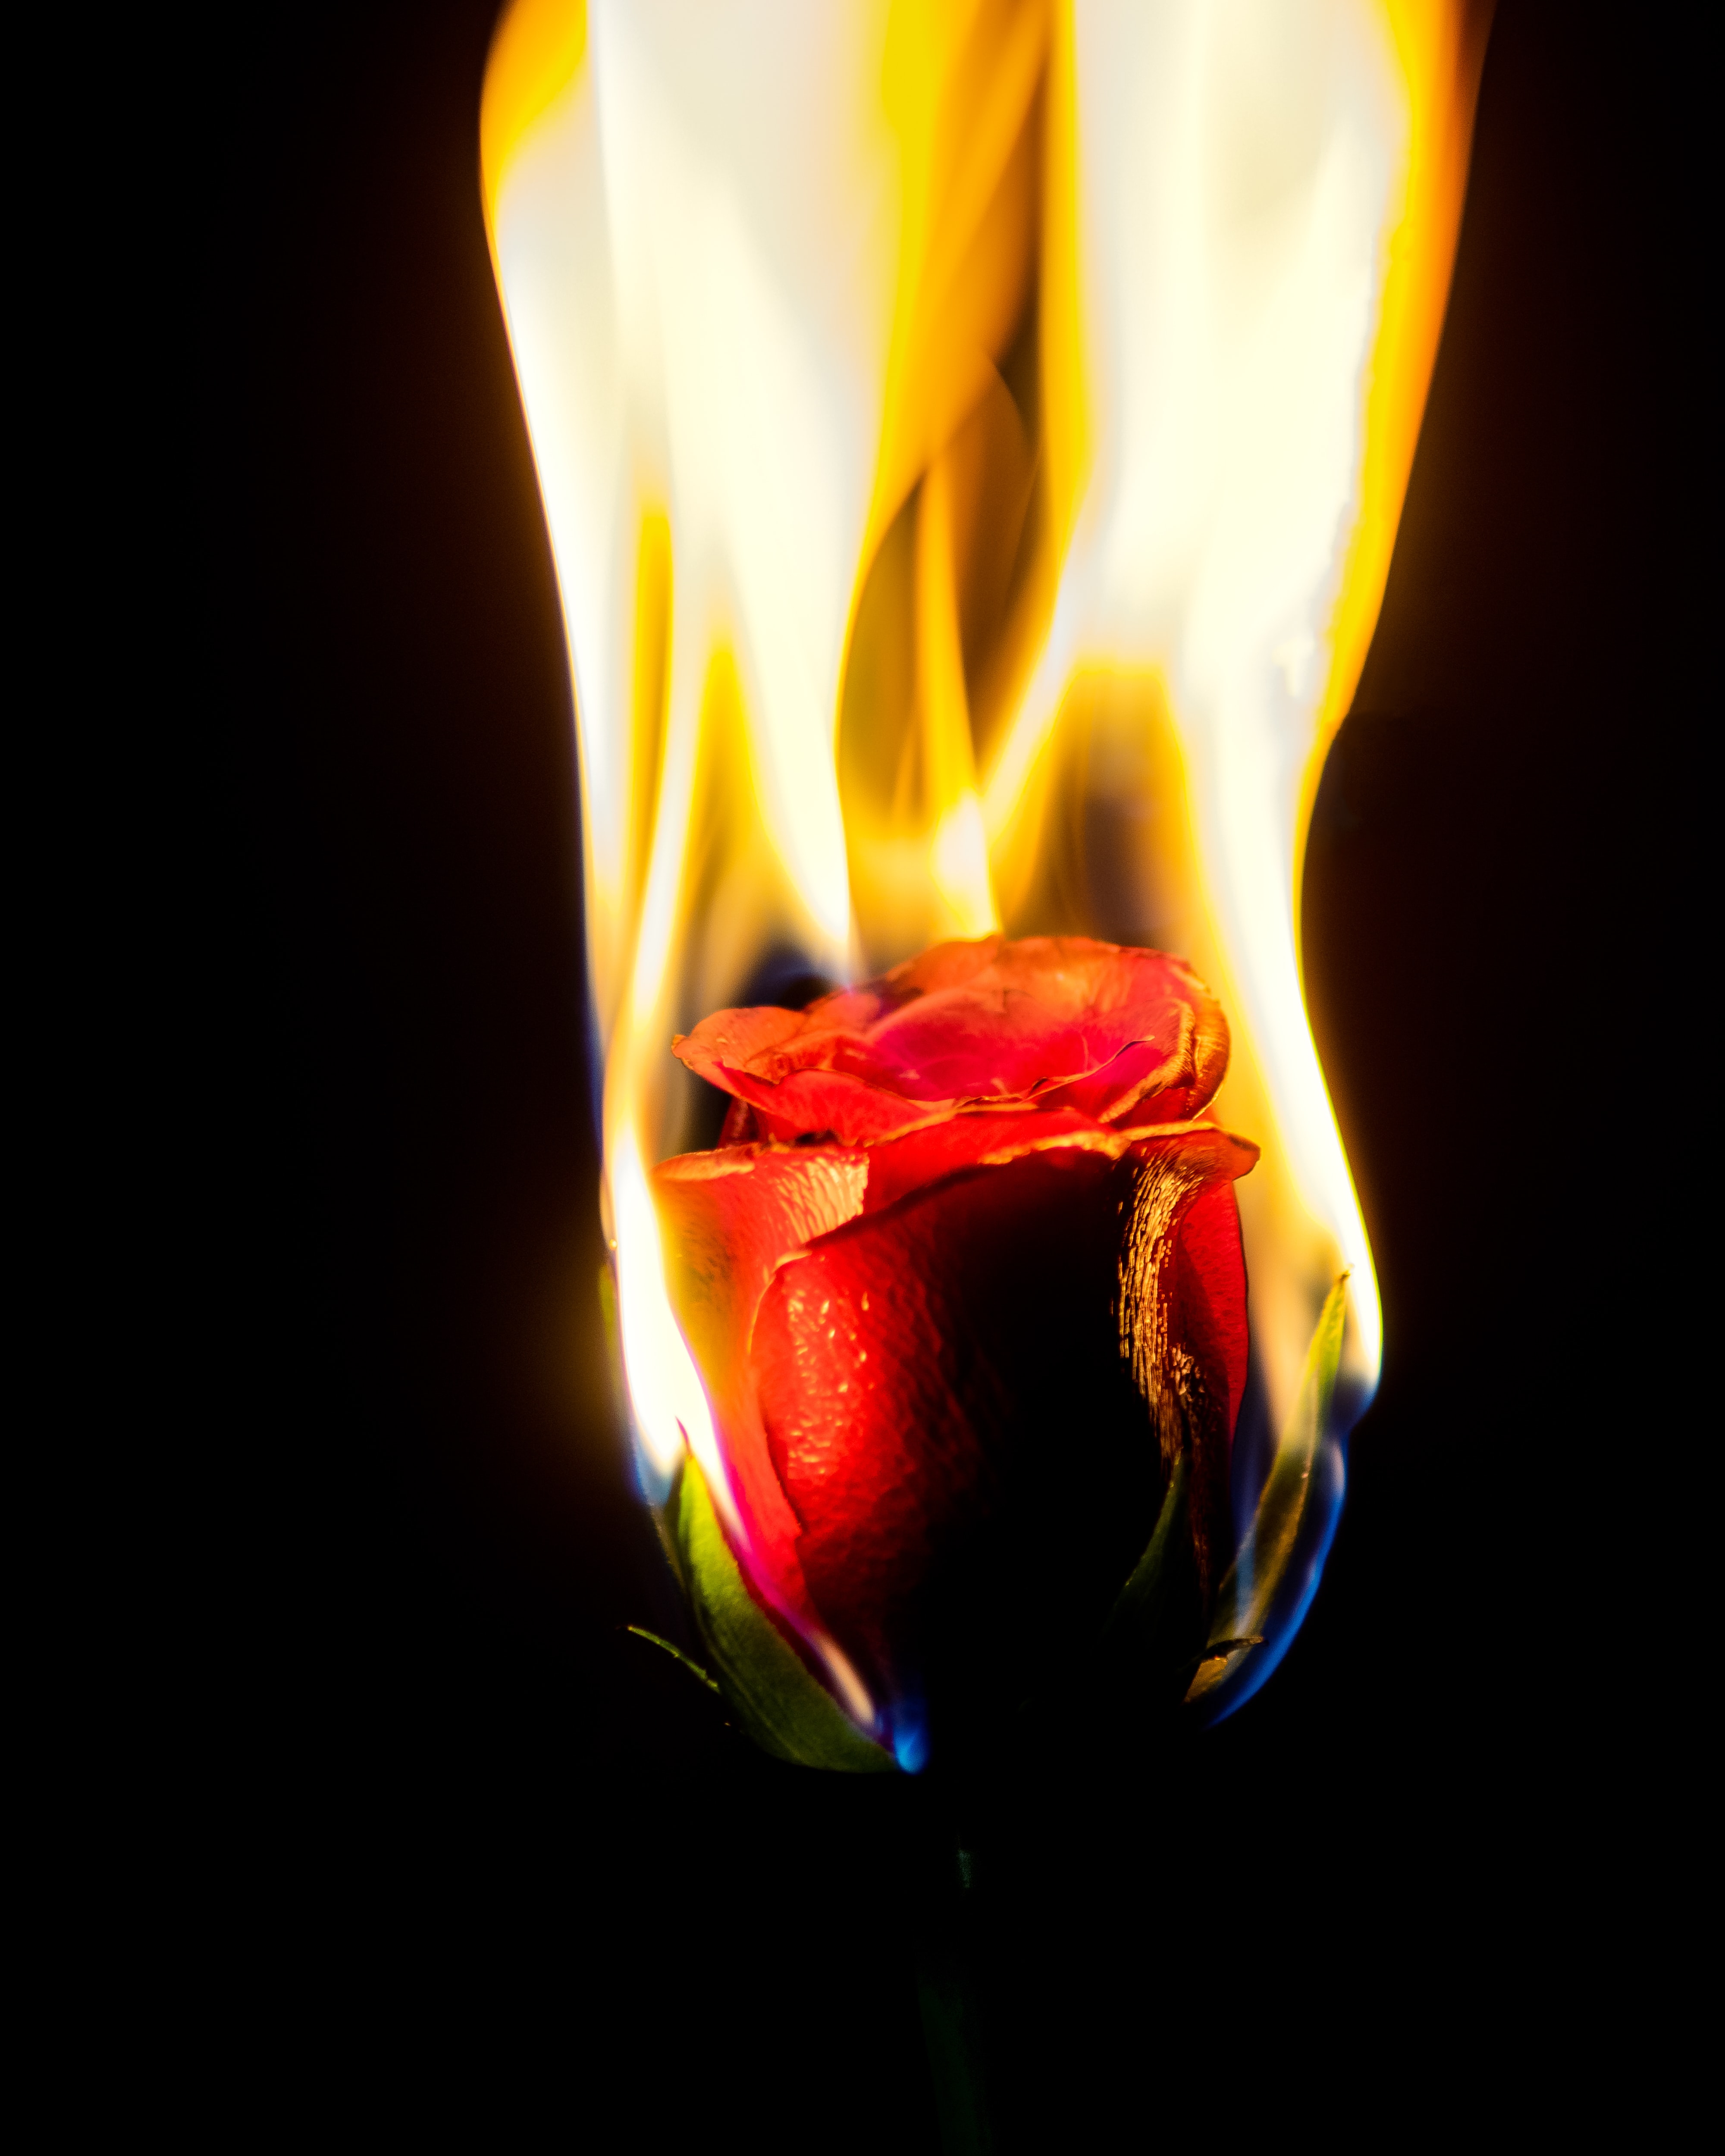 149873 download wallpaper flame, flowers, fire, flower, rose flower, rose screensavers and pictures for free